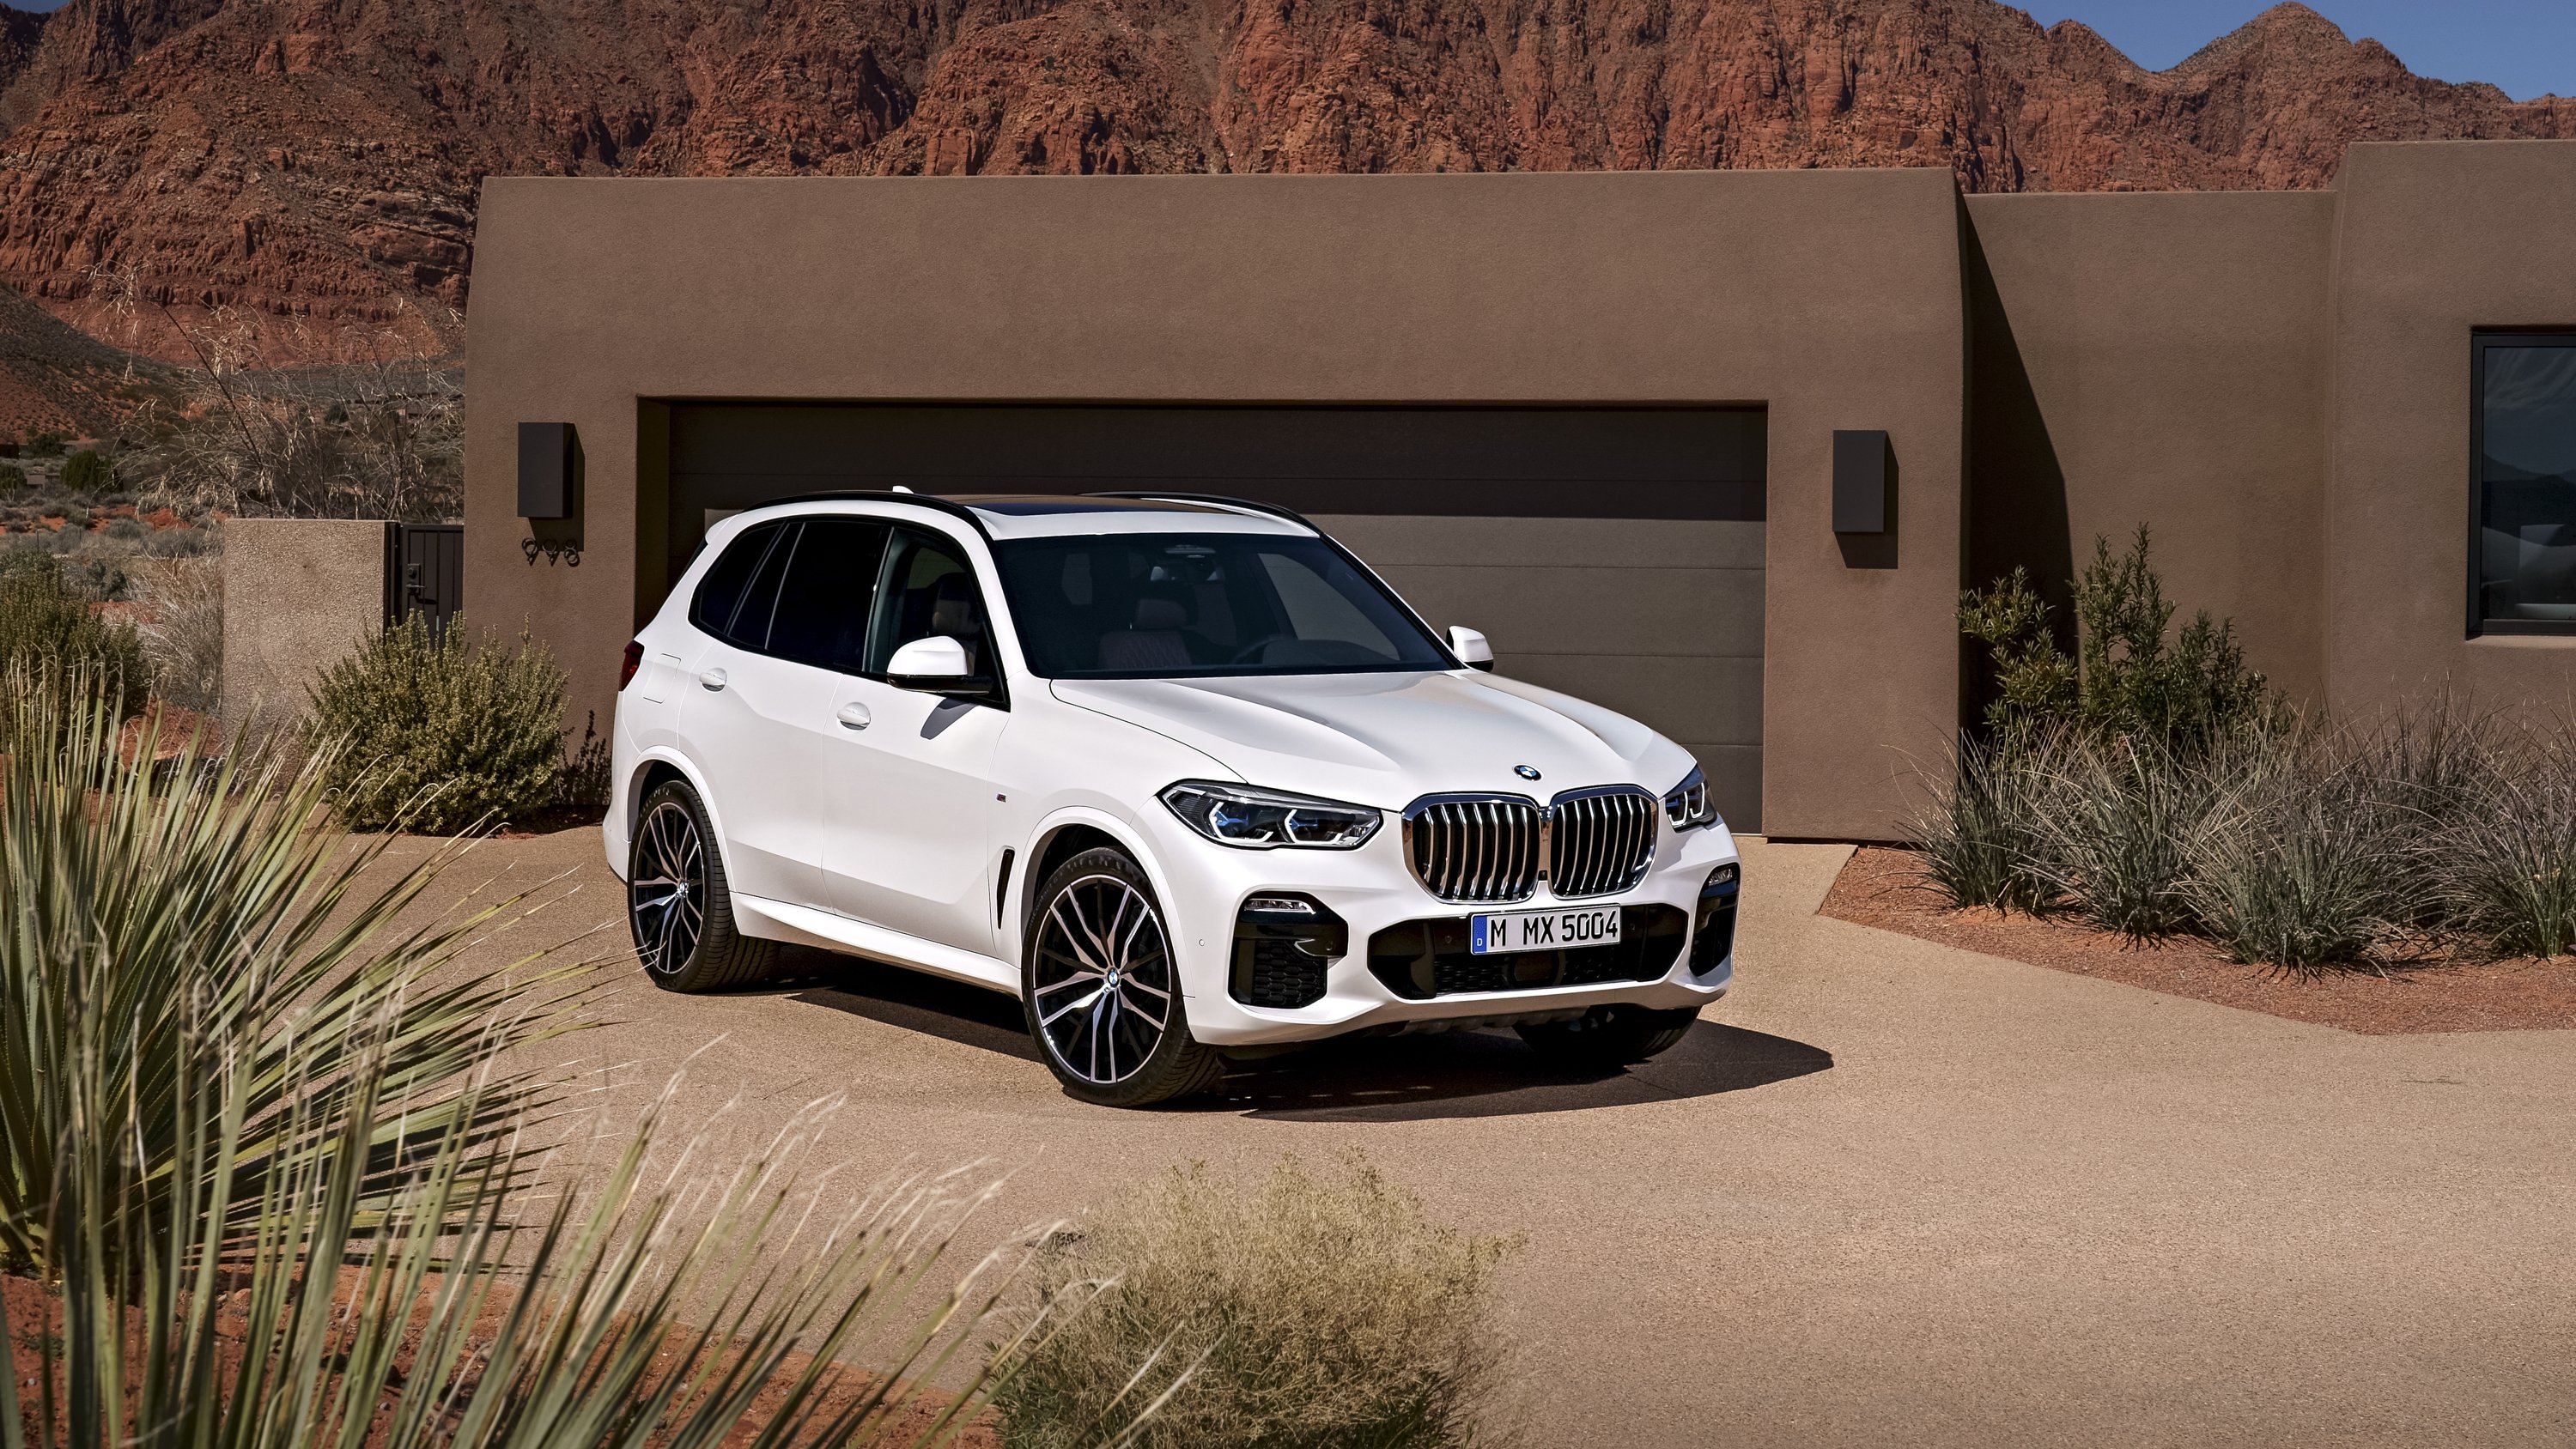 2019 Bmw X5 Pictures, Photos, Wallpapers - 2019 Bmw X5 M Sport , HD Wallpaper & Backgrounds